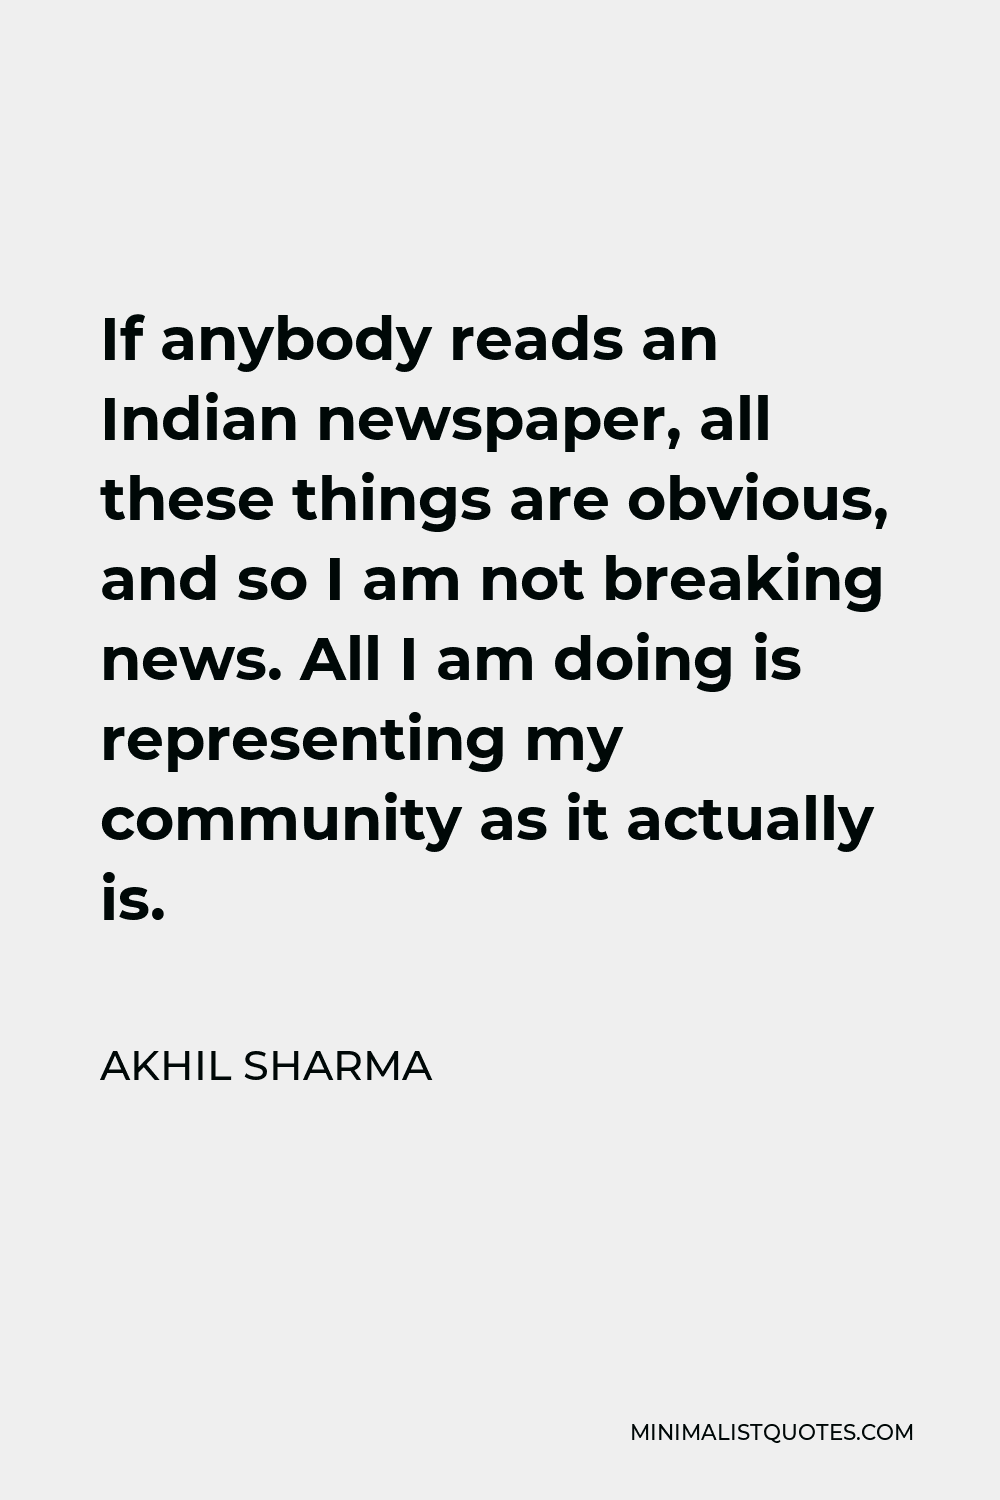 Akhil Sharma Quote - If anybody reads an Indian newspaper, all these things are obvious, and so I am not breaking news. All I am doing is representing my community as it actually is.